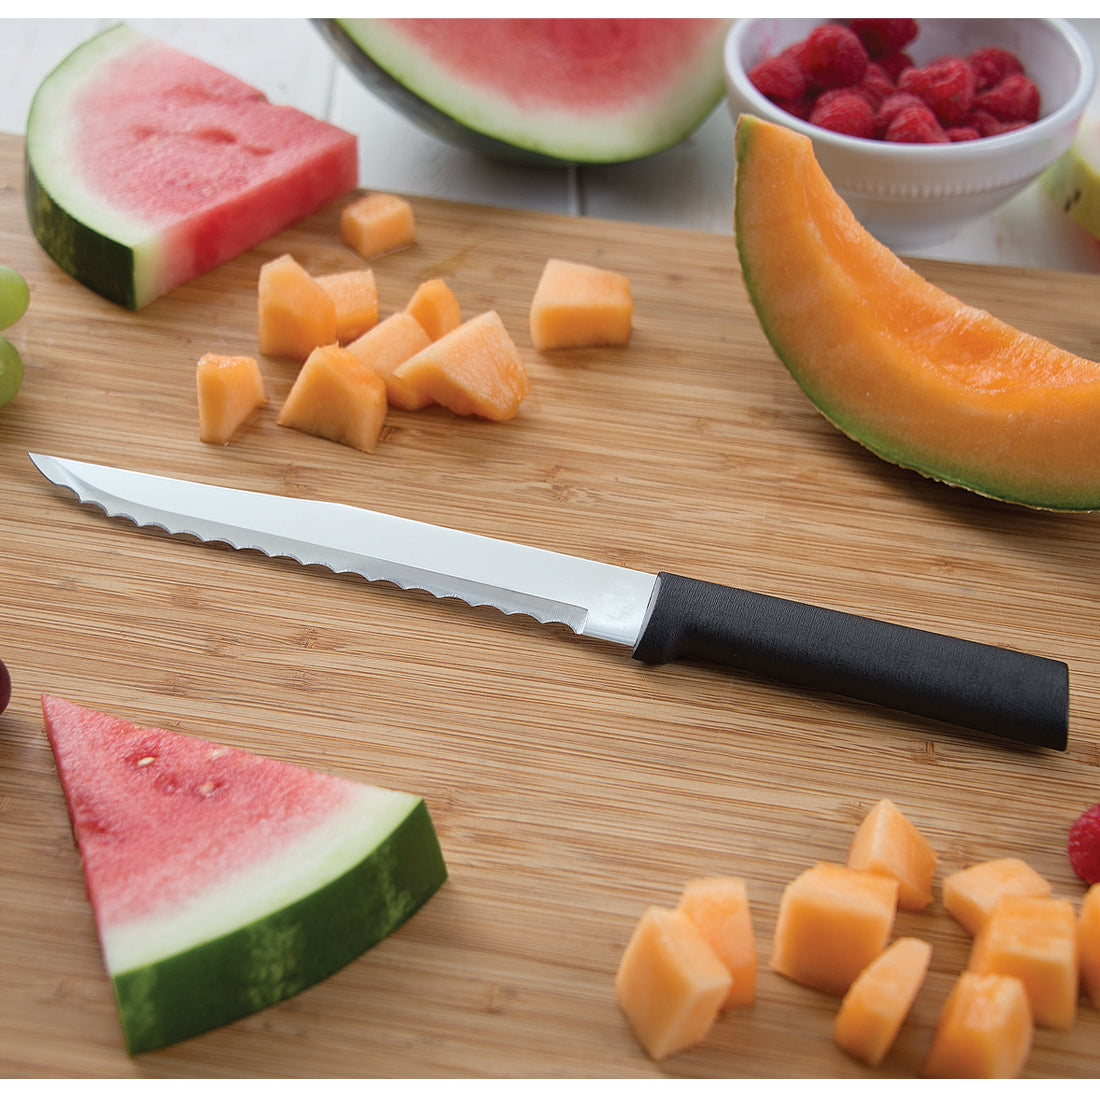 The Best Budget Kitchen Knives of 2023 - The Seasoned Mom